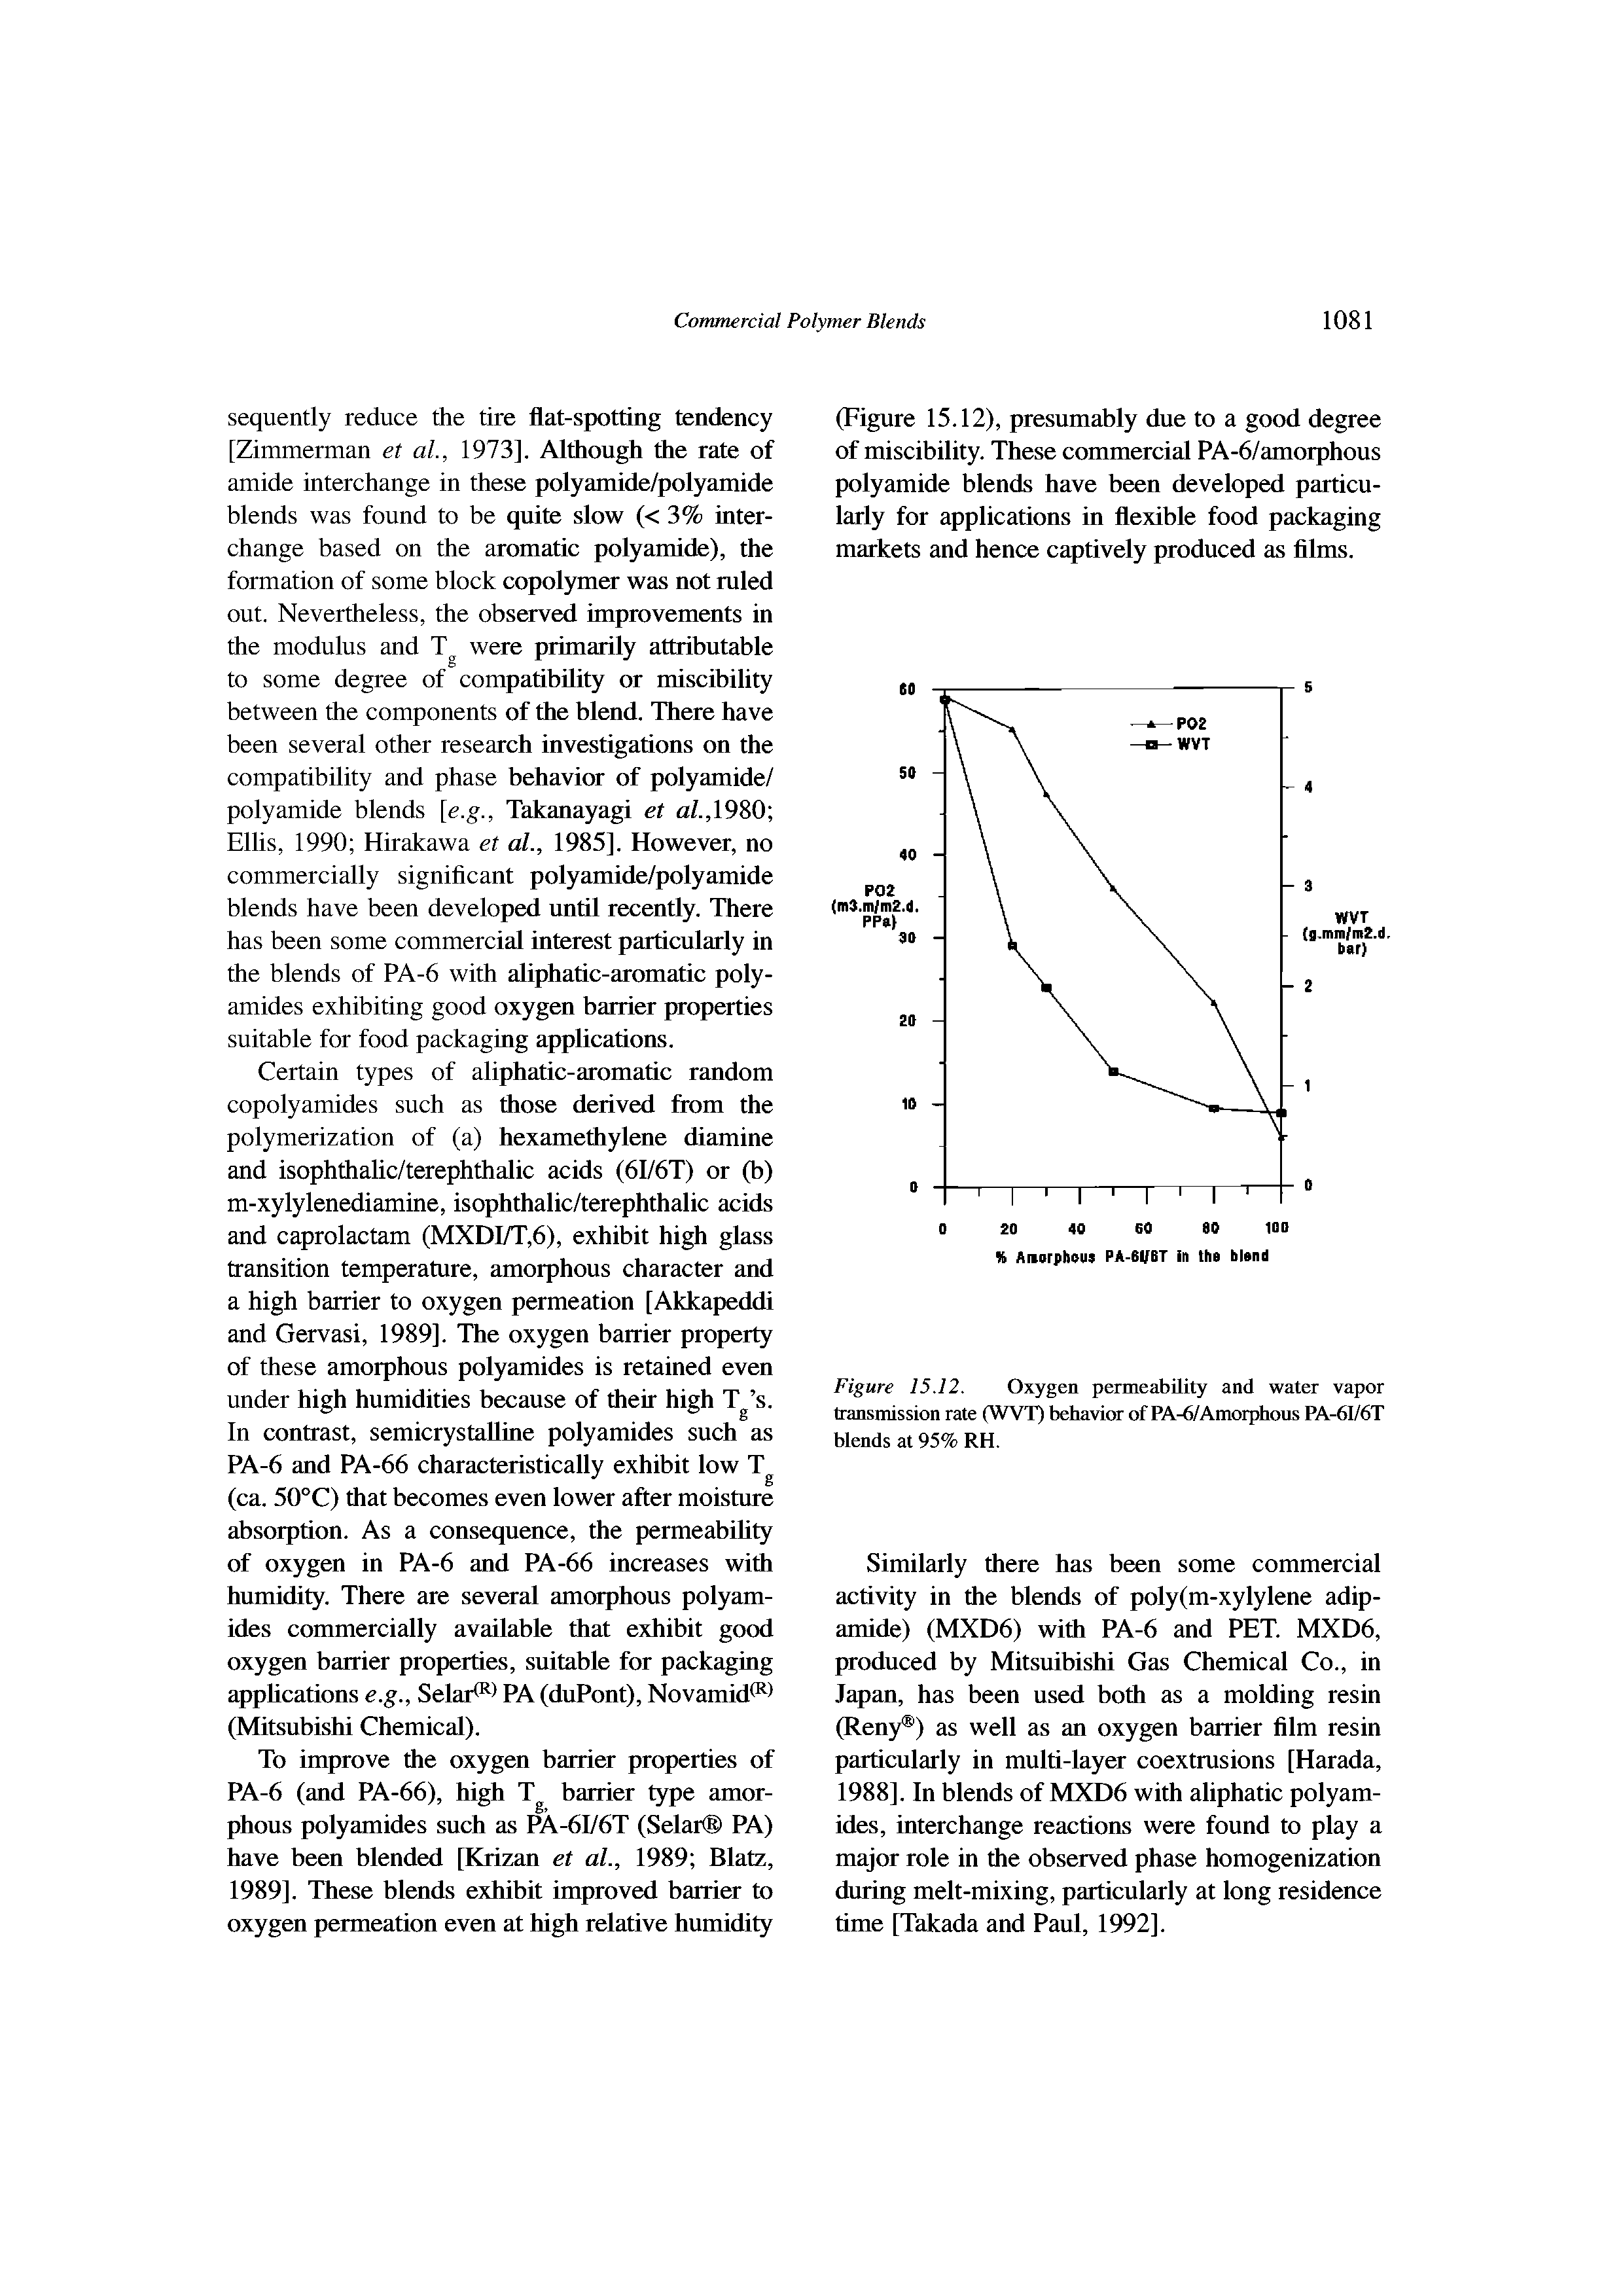 Figure 15.12. Oxygen permeability and water vapor transmission rate (WVT) behavior of PA-6/Amorphous PA-6I/6T blends at 95% RH.